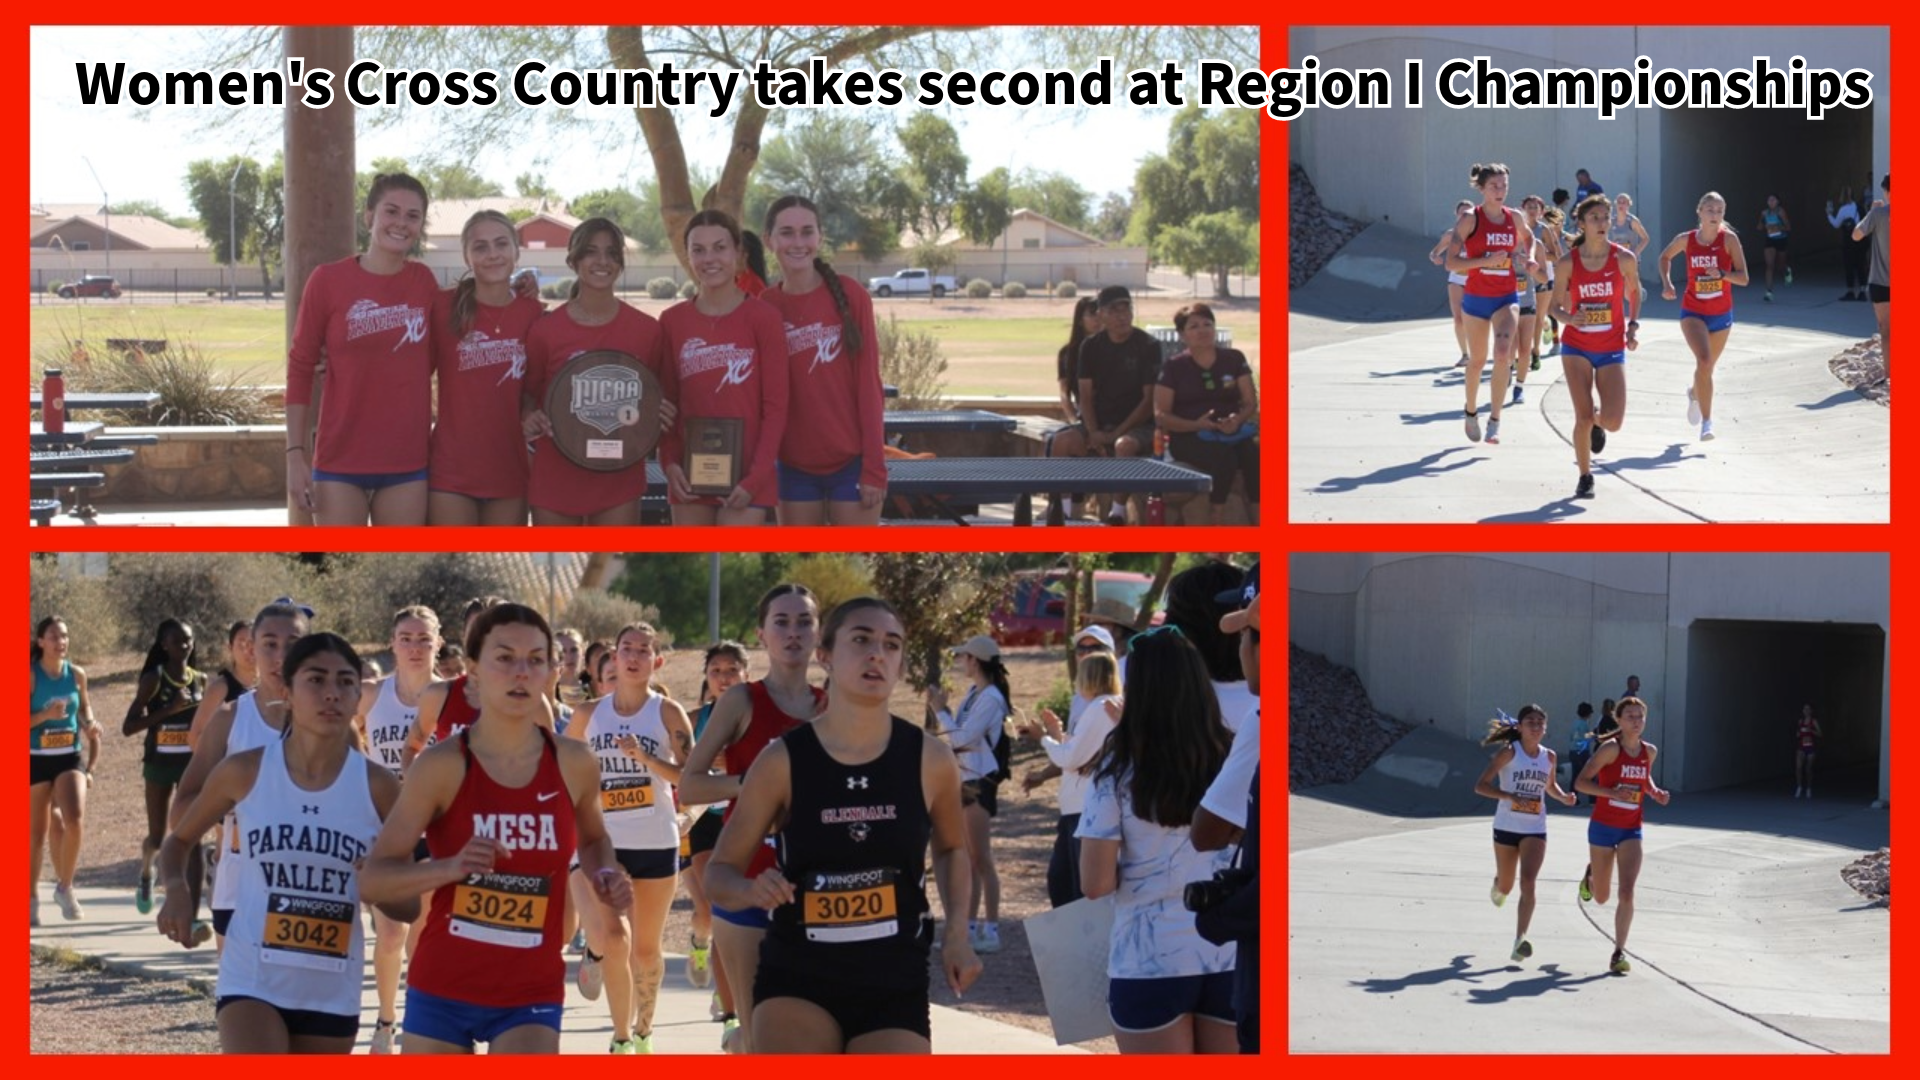 Women's Cross Country takes second at Region I Championships